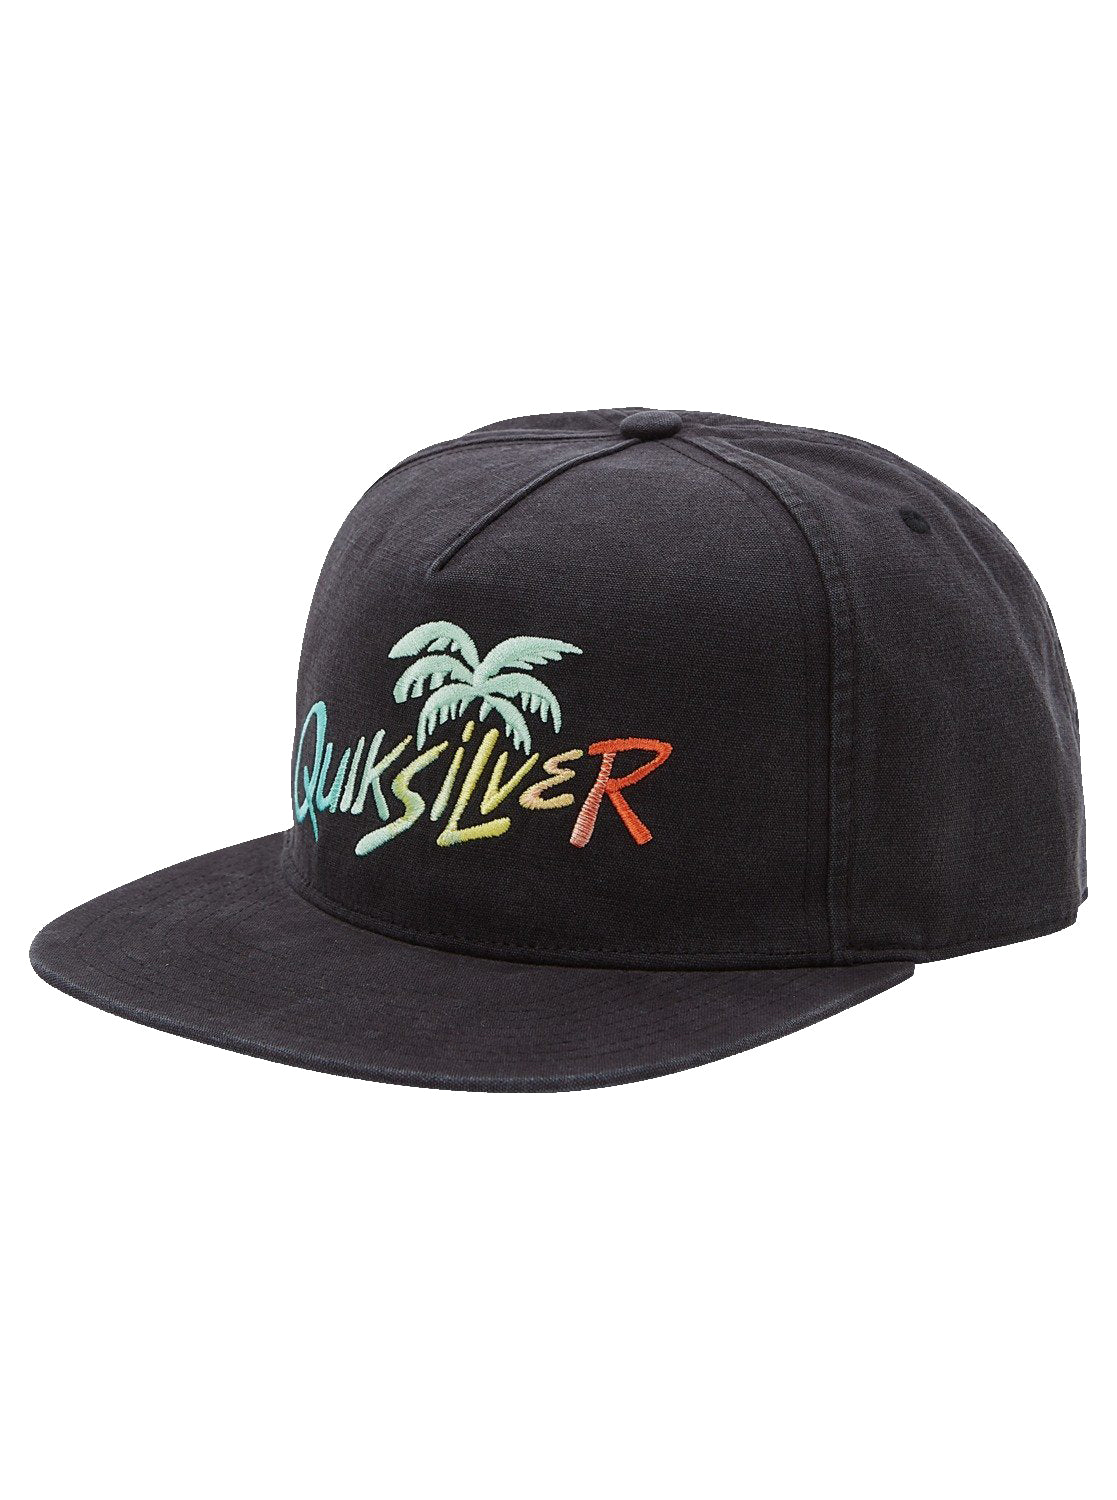 Quiksilver Tilted Thoughts Snapback Hat